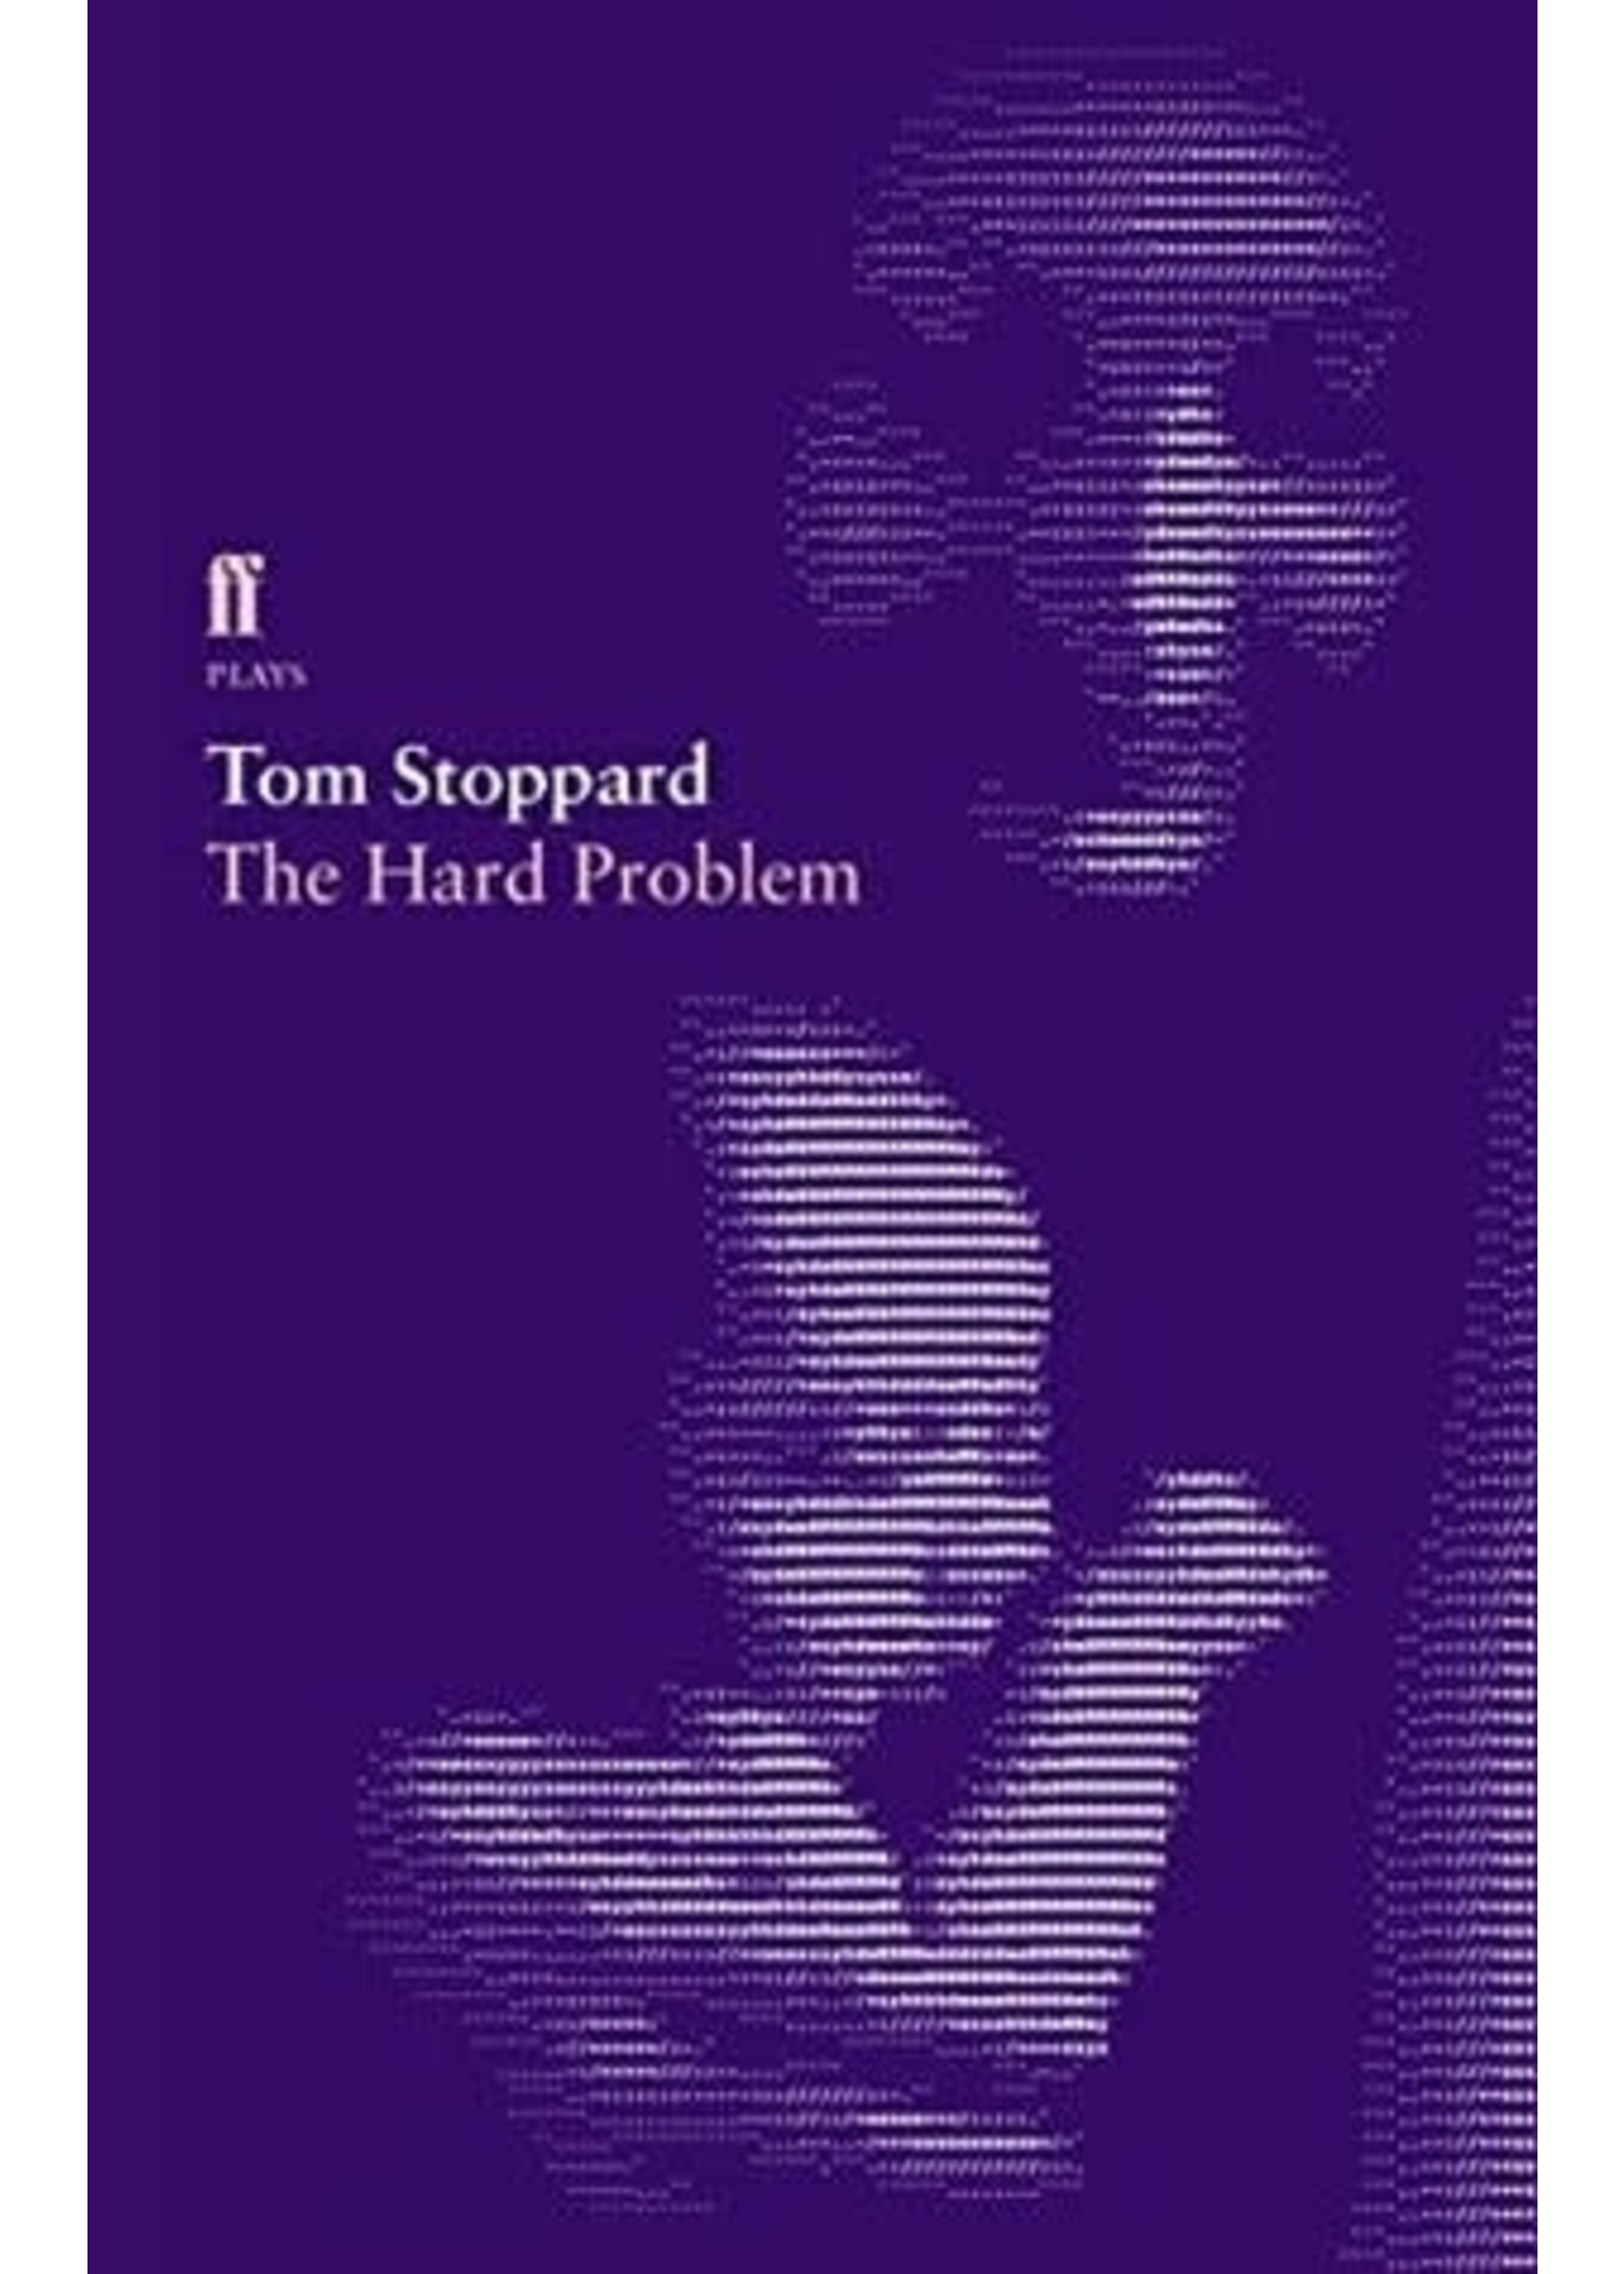 The Hard Problem by Tom Stoppard